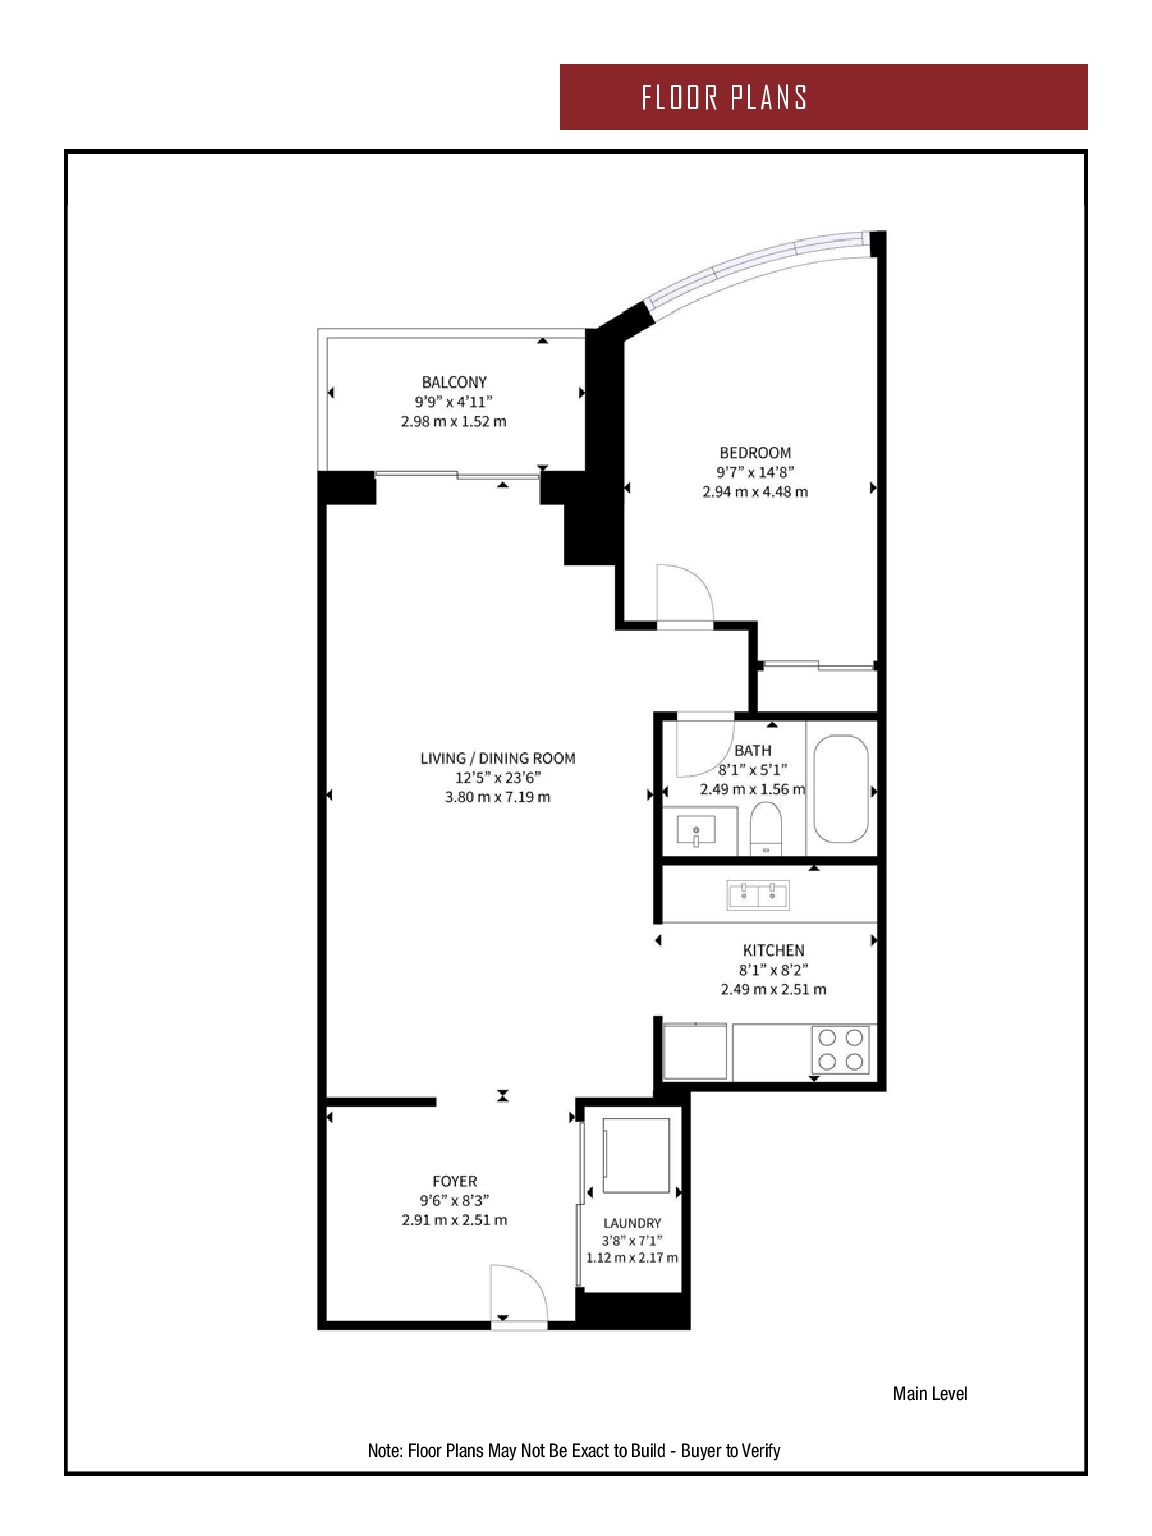 650 Lawrence Avenue West Unit 915 - Floor Plans for MLS - 19MAy22